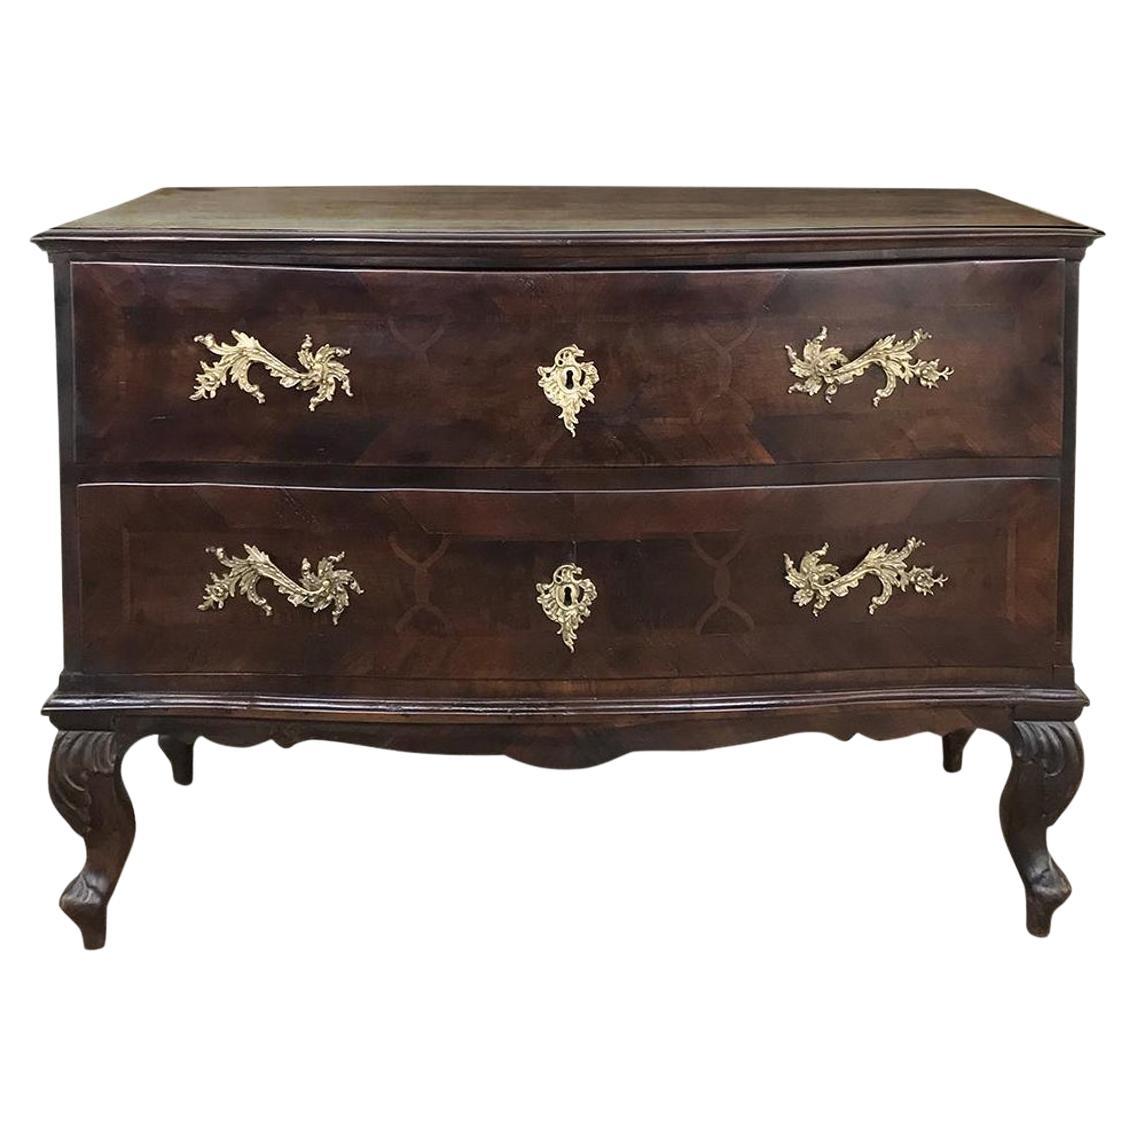 19th Century Italian Fruitwood Inlaid Commode For Sale